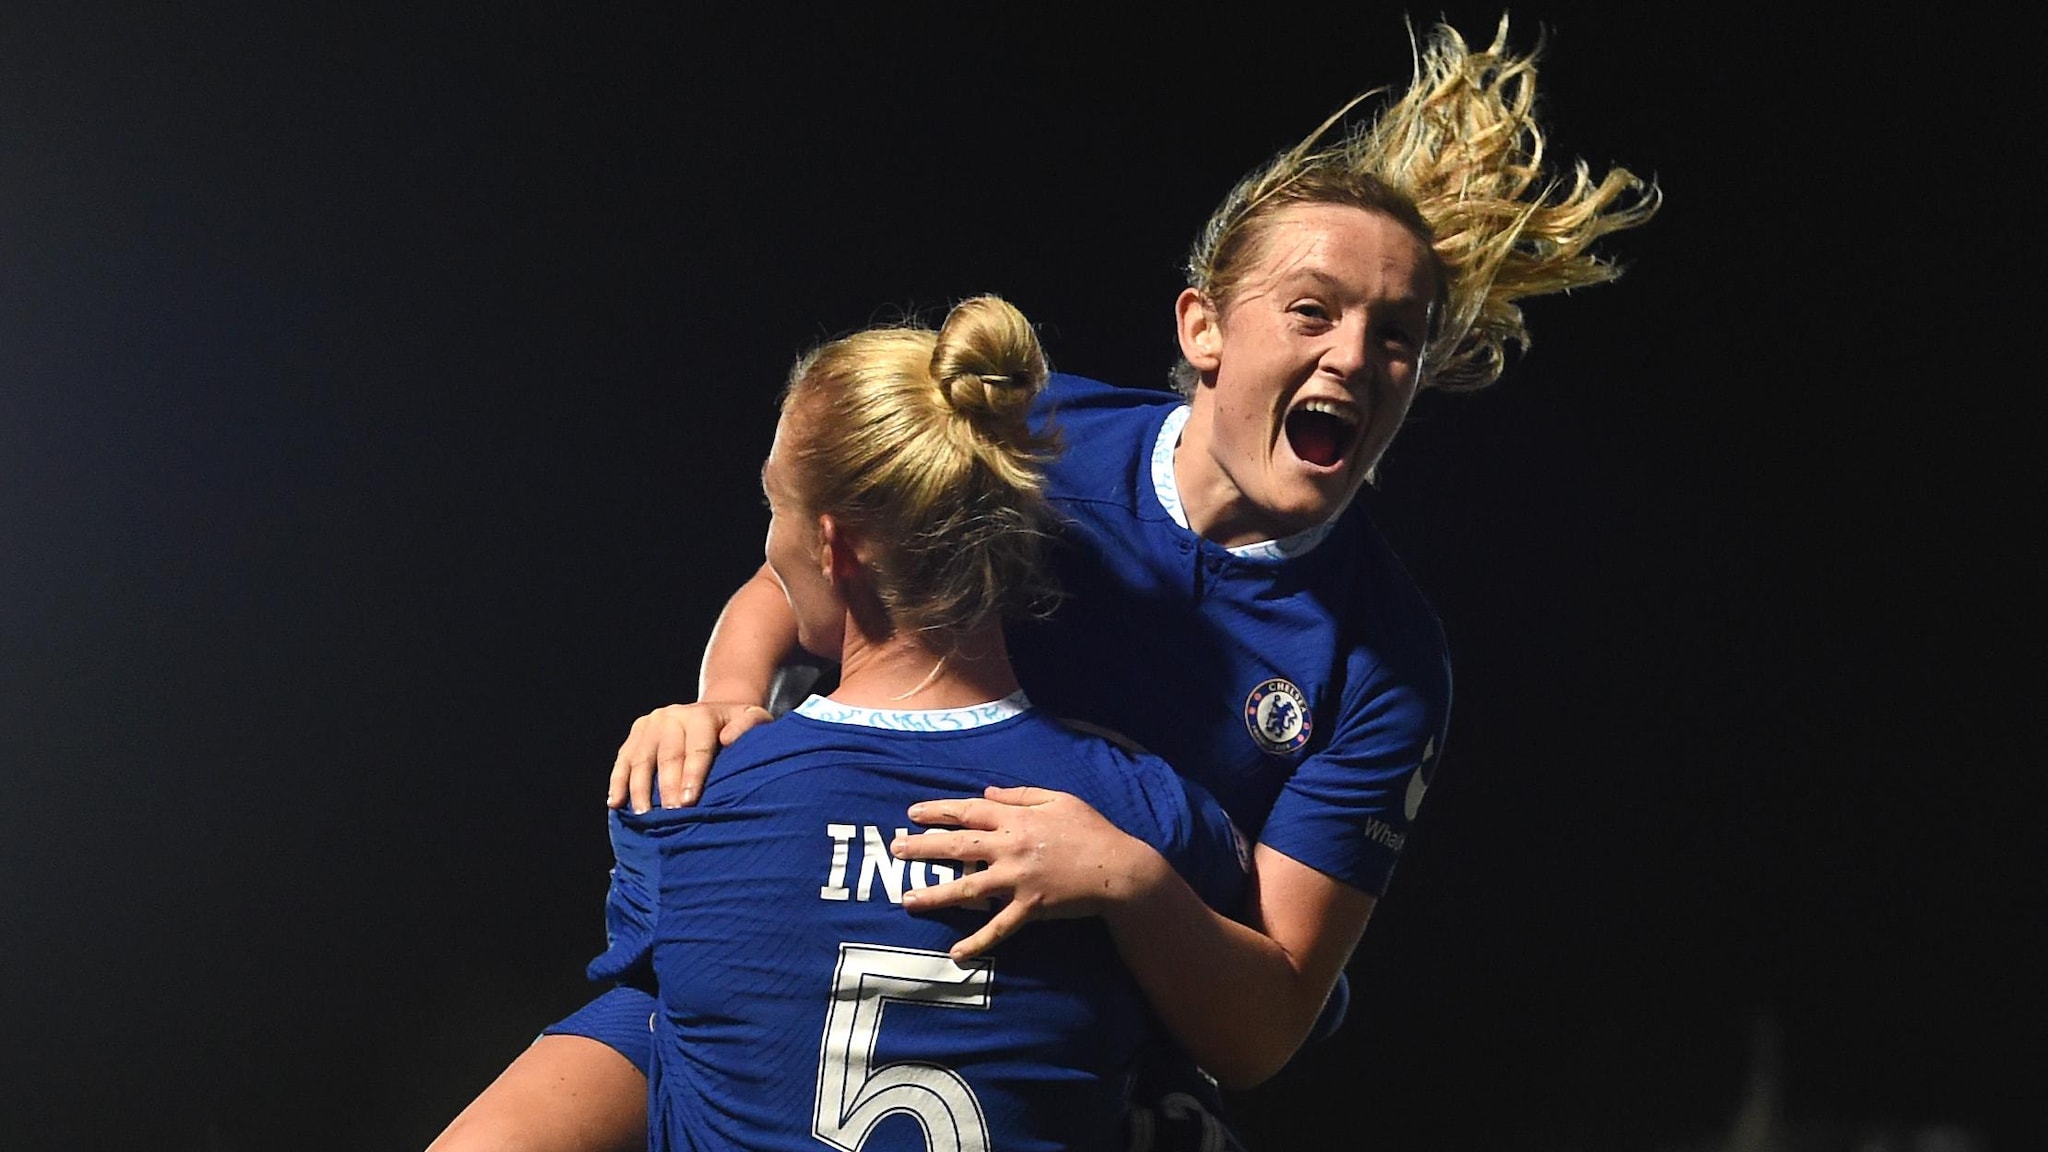 Women’s Champions League round-up and highlights: Chelsea perfect, Paris win, Roma hold Wolfsburg | UEFA Women’s Champions League